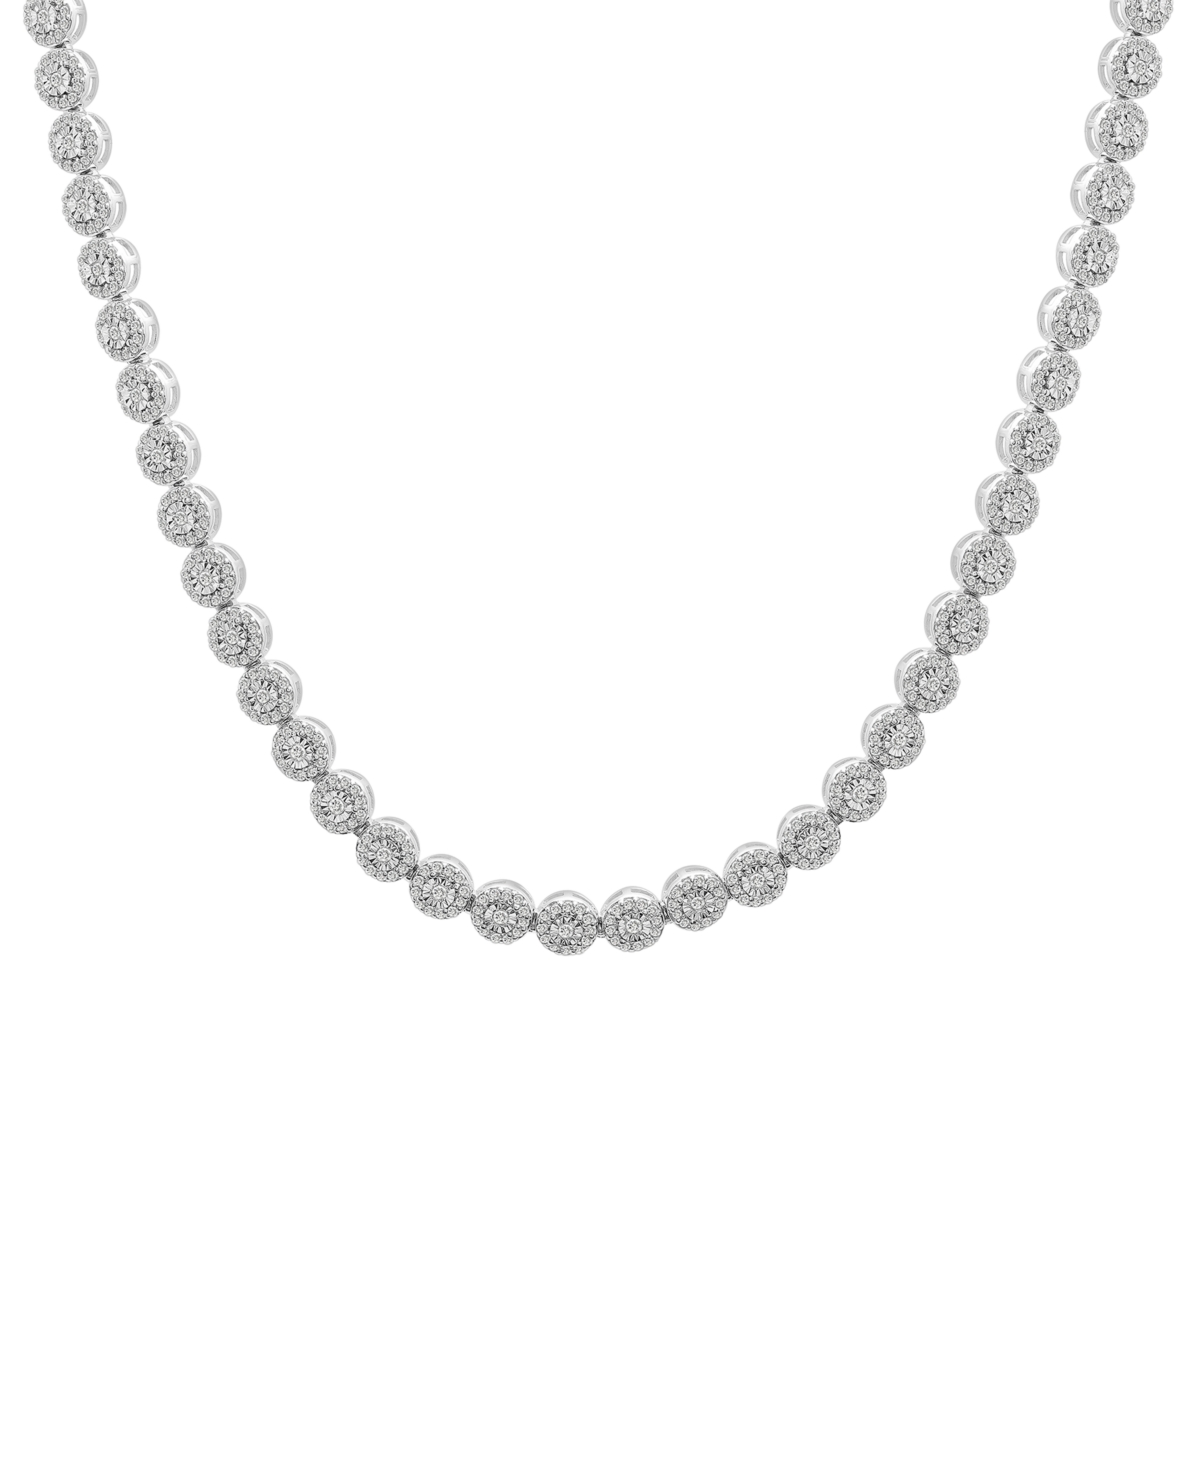 Diamond 17" Collar Necklace (2 ct. t.w.) in Sterling Silver, Created for Macy's - Sterling Silver